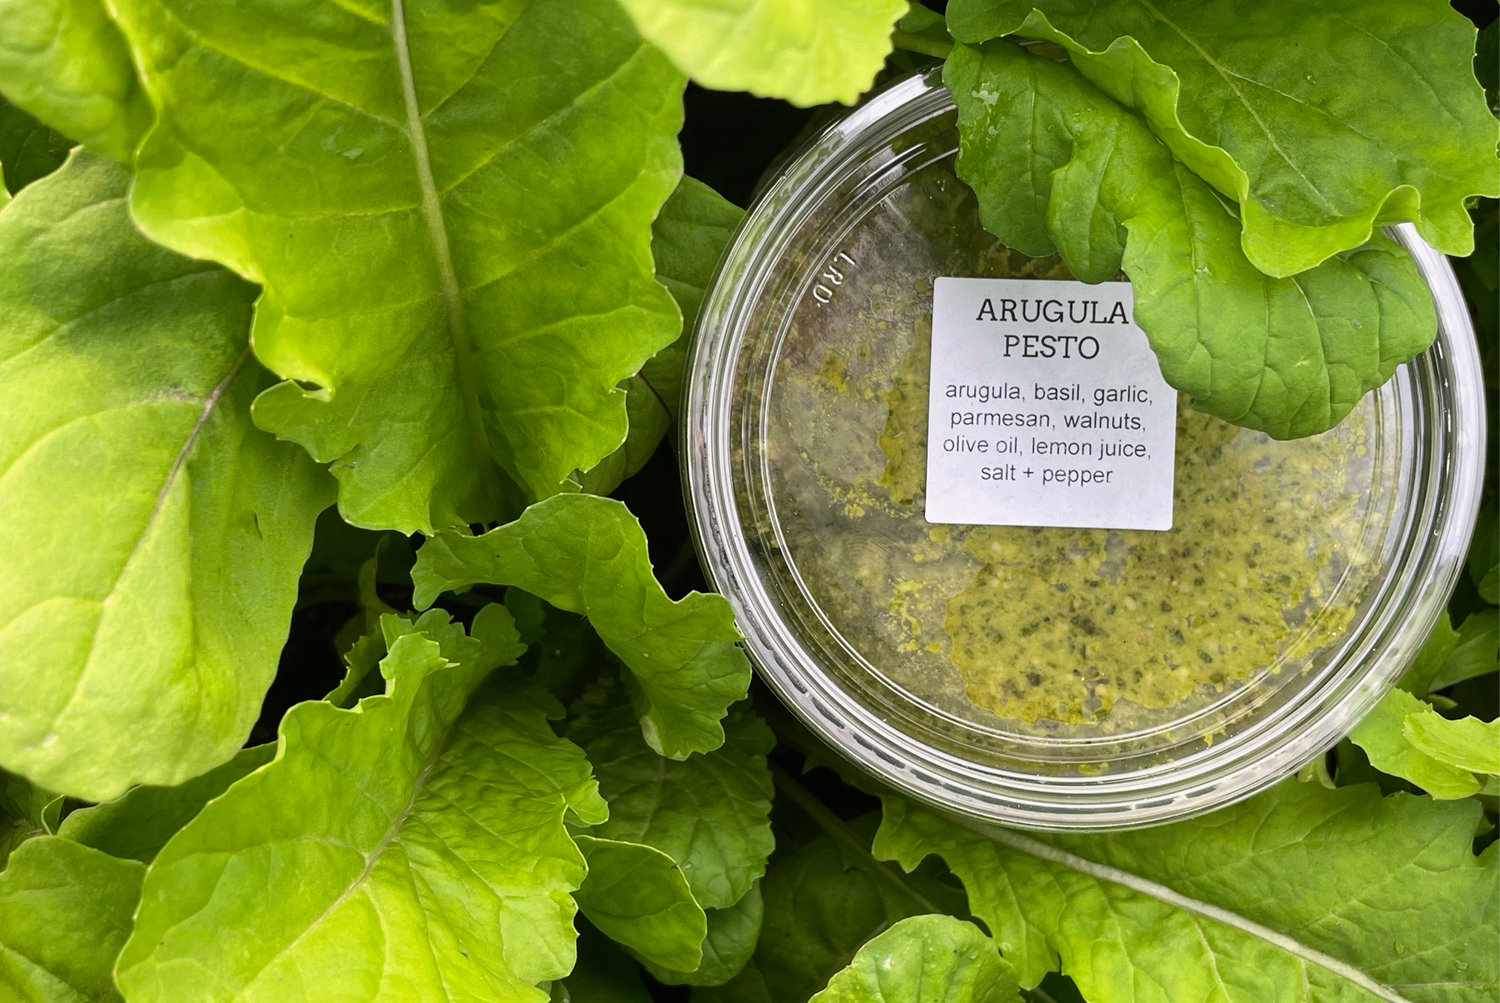 Leafy greens are mixed into light spring pestos with parmesan, lemon, olive oil, and cracked pepper